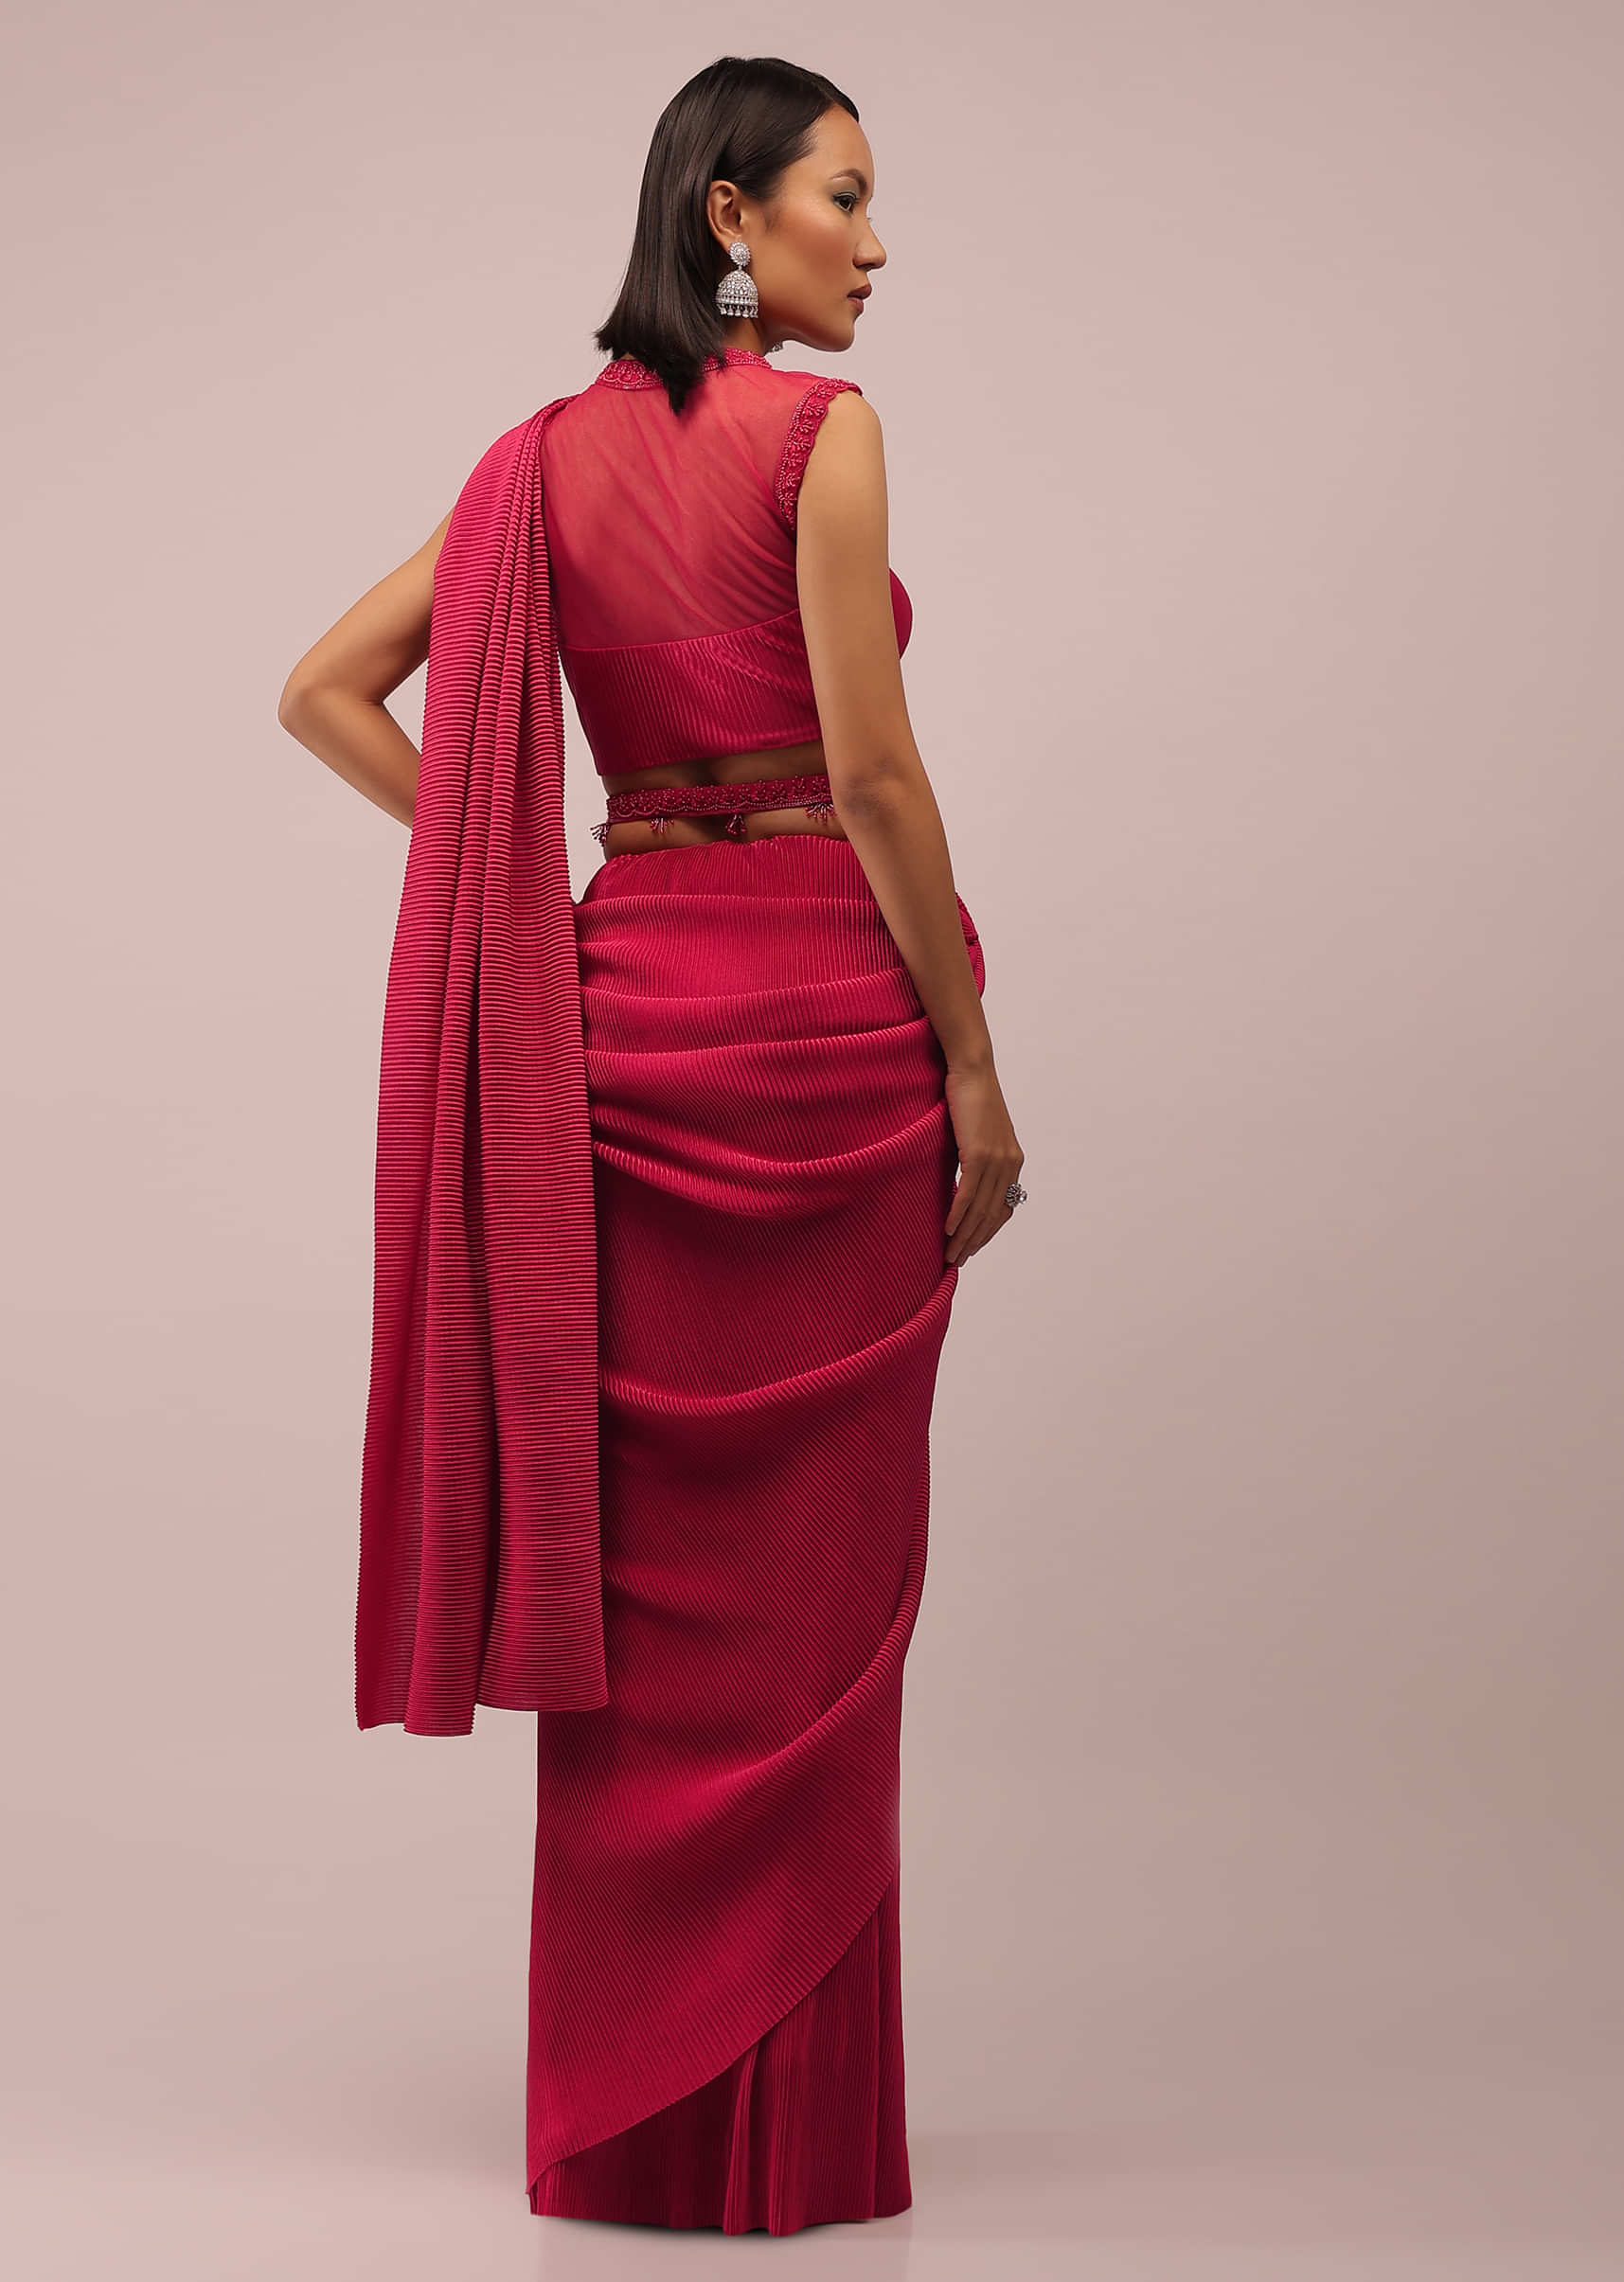 Crimson Red Saree In Crush With A Crop Top In The Illusioned Neckline, Paired With A Belt In Cut Dana And Moti Embroidery